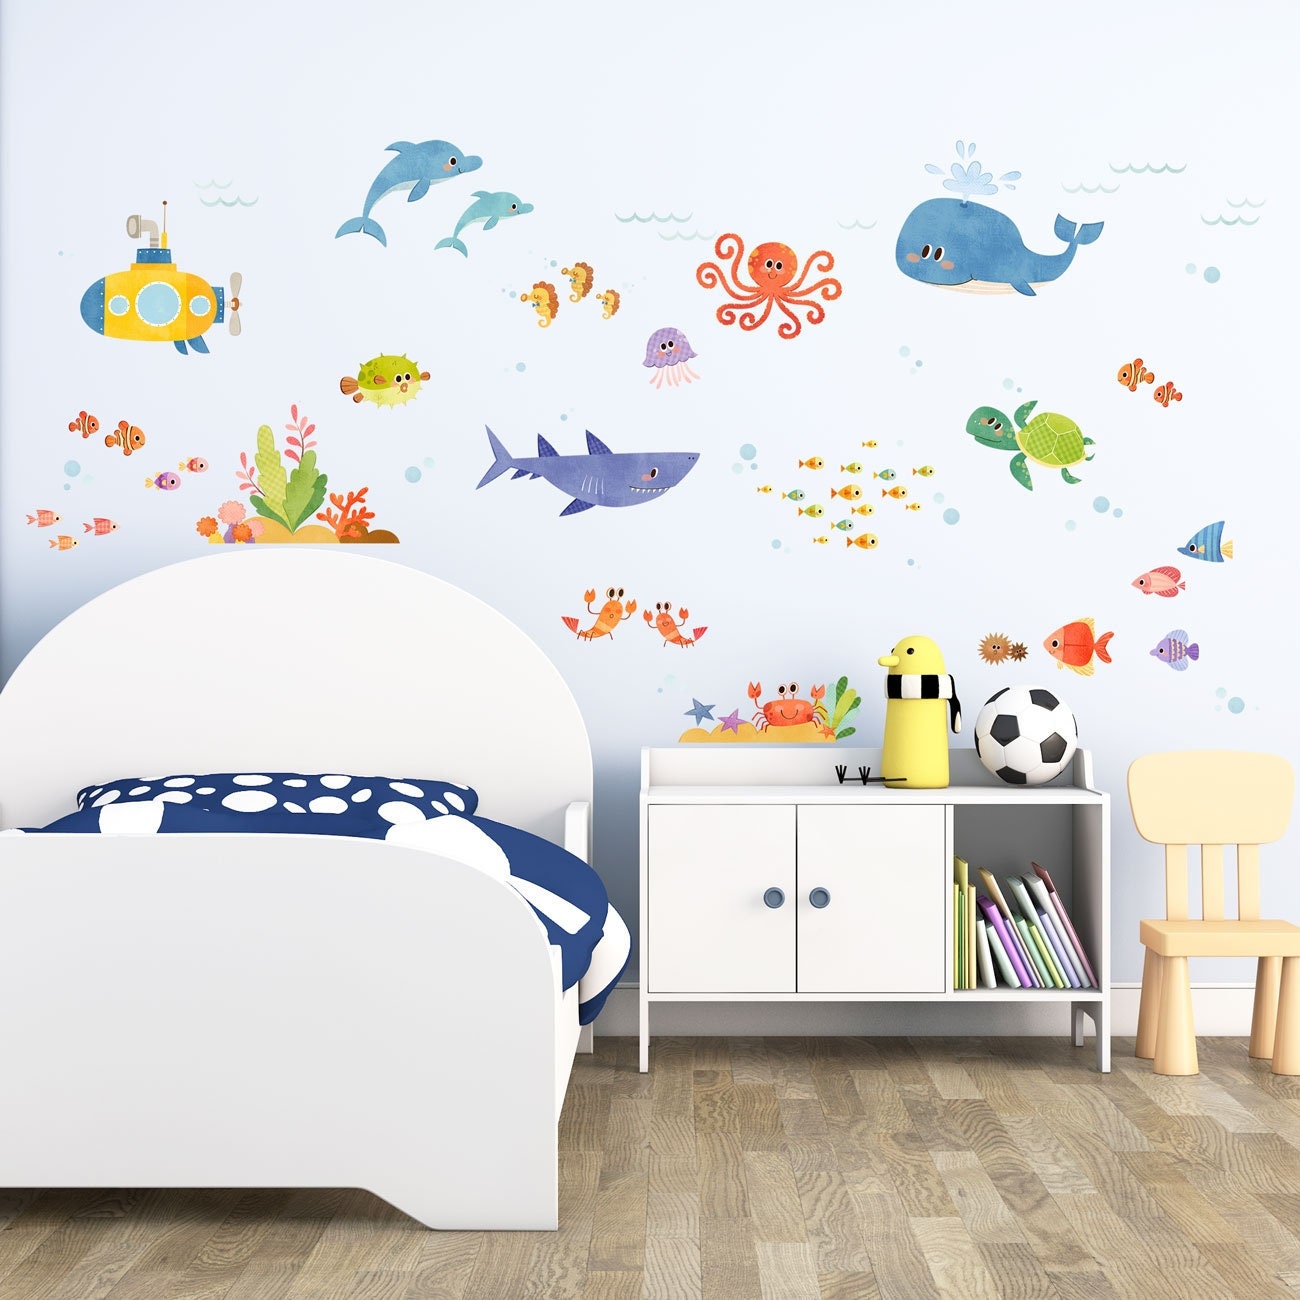 Decowall DW-1611S Sea Adventure Wall Stickers | Etsy